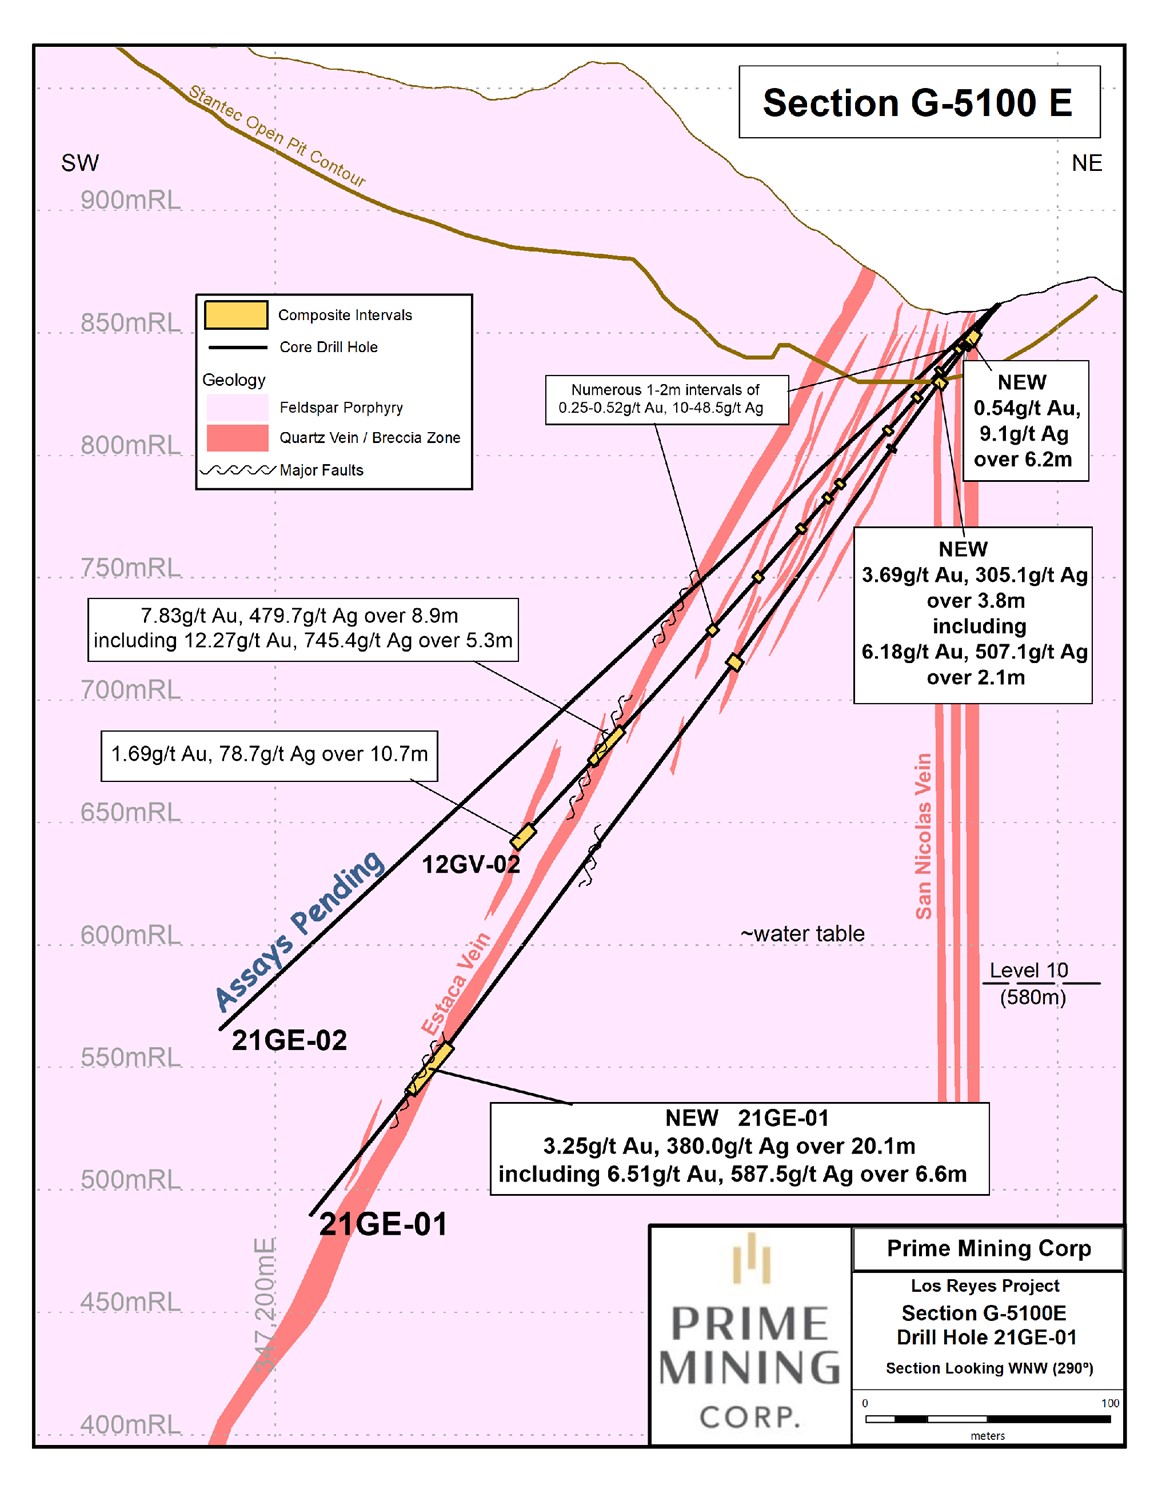 Figure 2 Cross Section of Gudalupe East and 21GE_01 Highlighting New Intersections and Historic Drilling